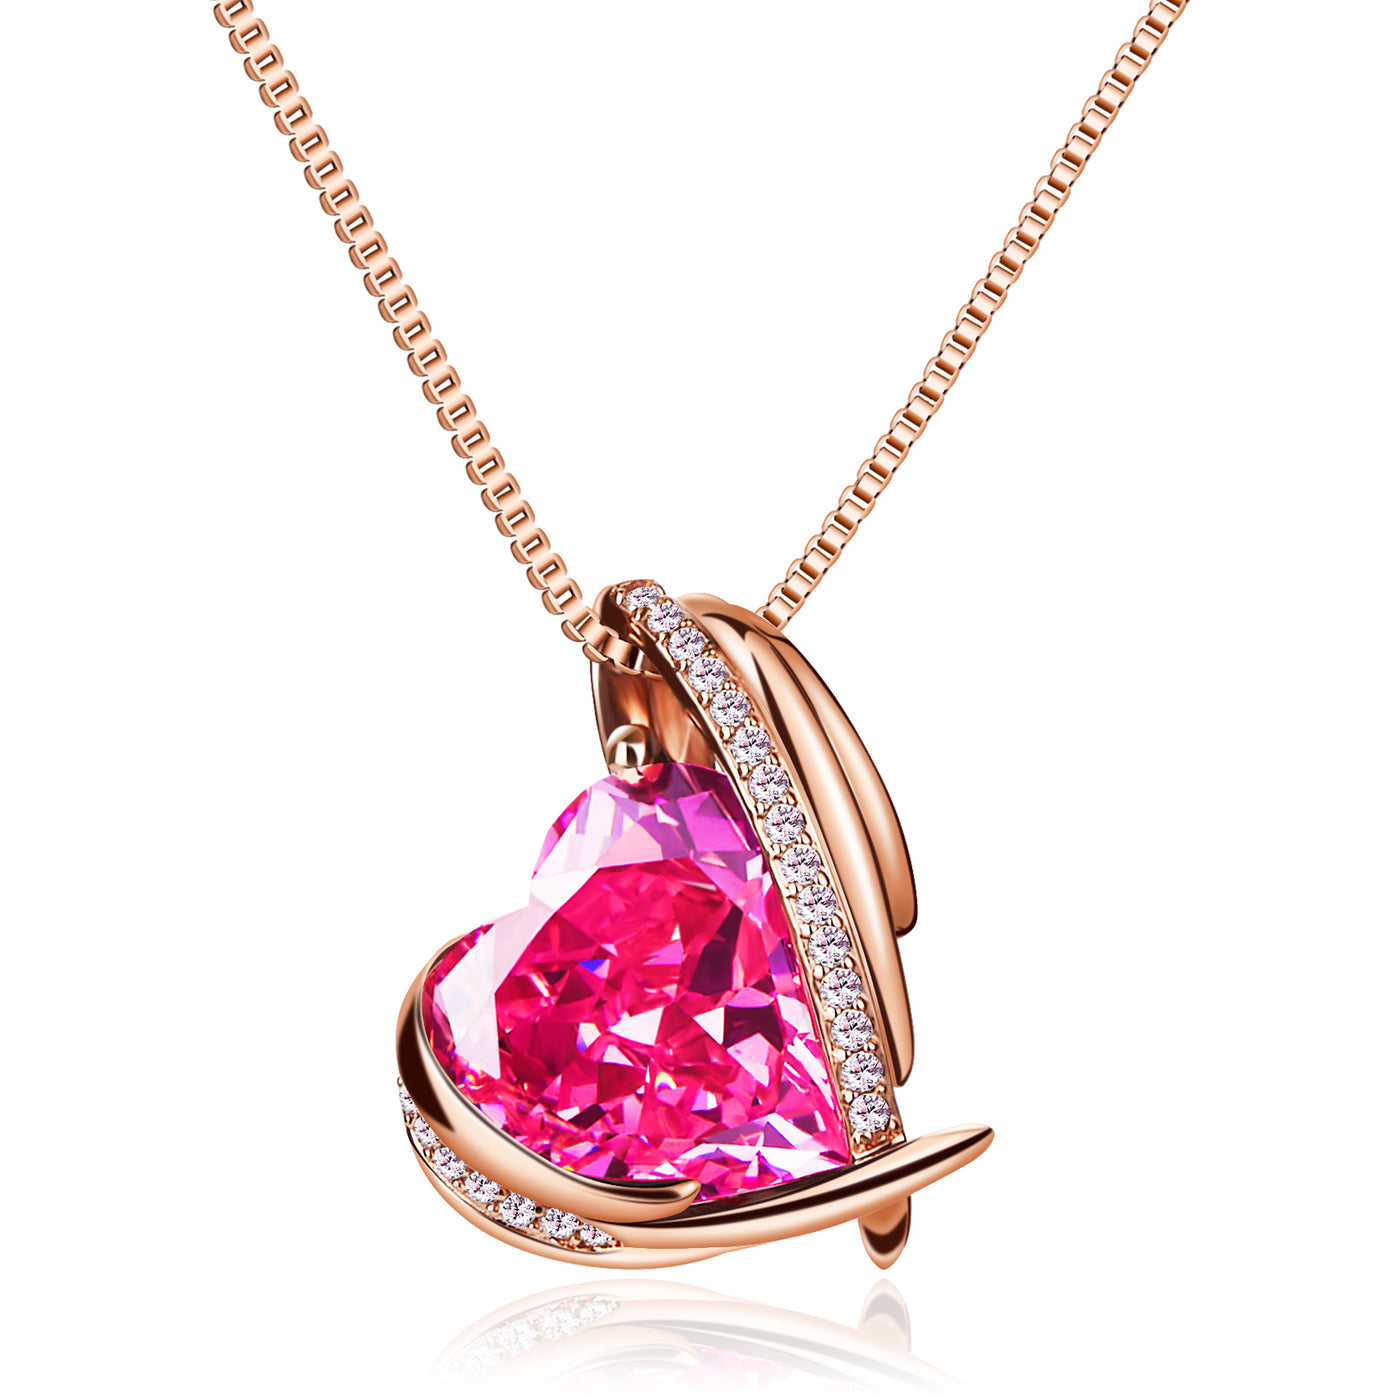 BOSTANTEN Rose Gold Plated Pendant Necklace with Birthstone Love Heart Crystal Jewelry Birthday Gifts for Women Mom Wife Girlfriend, 18"+2" - BOSTANTEN